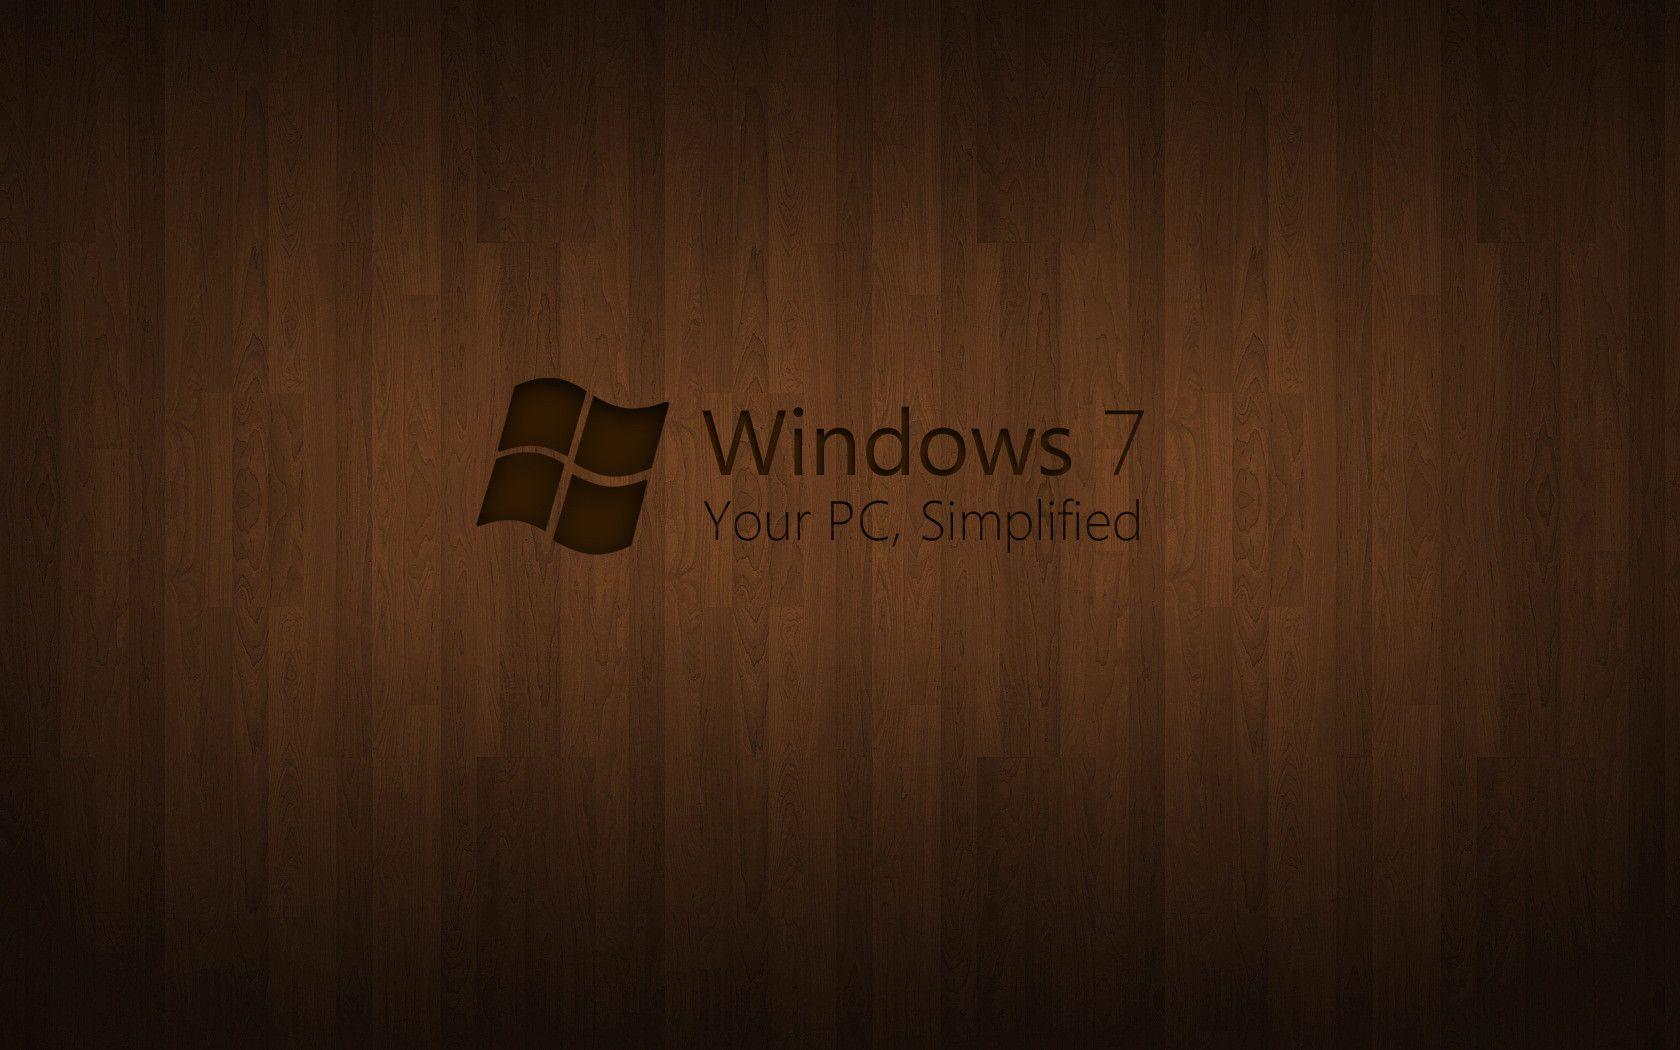 Awesome Windows 7 Wallpaper